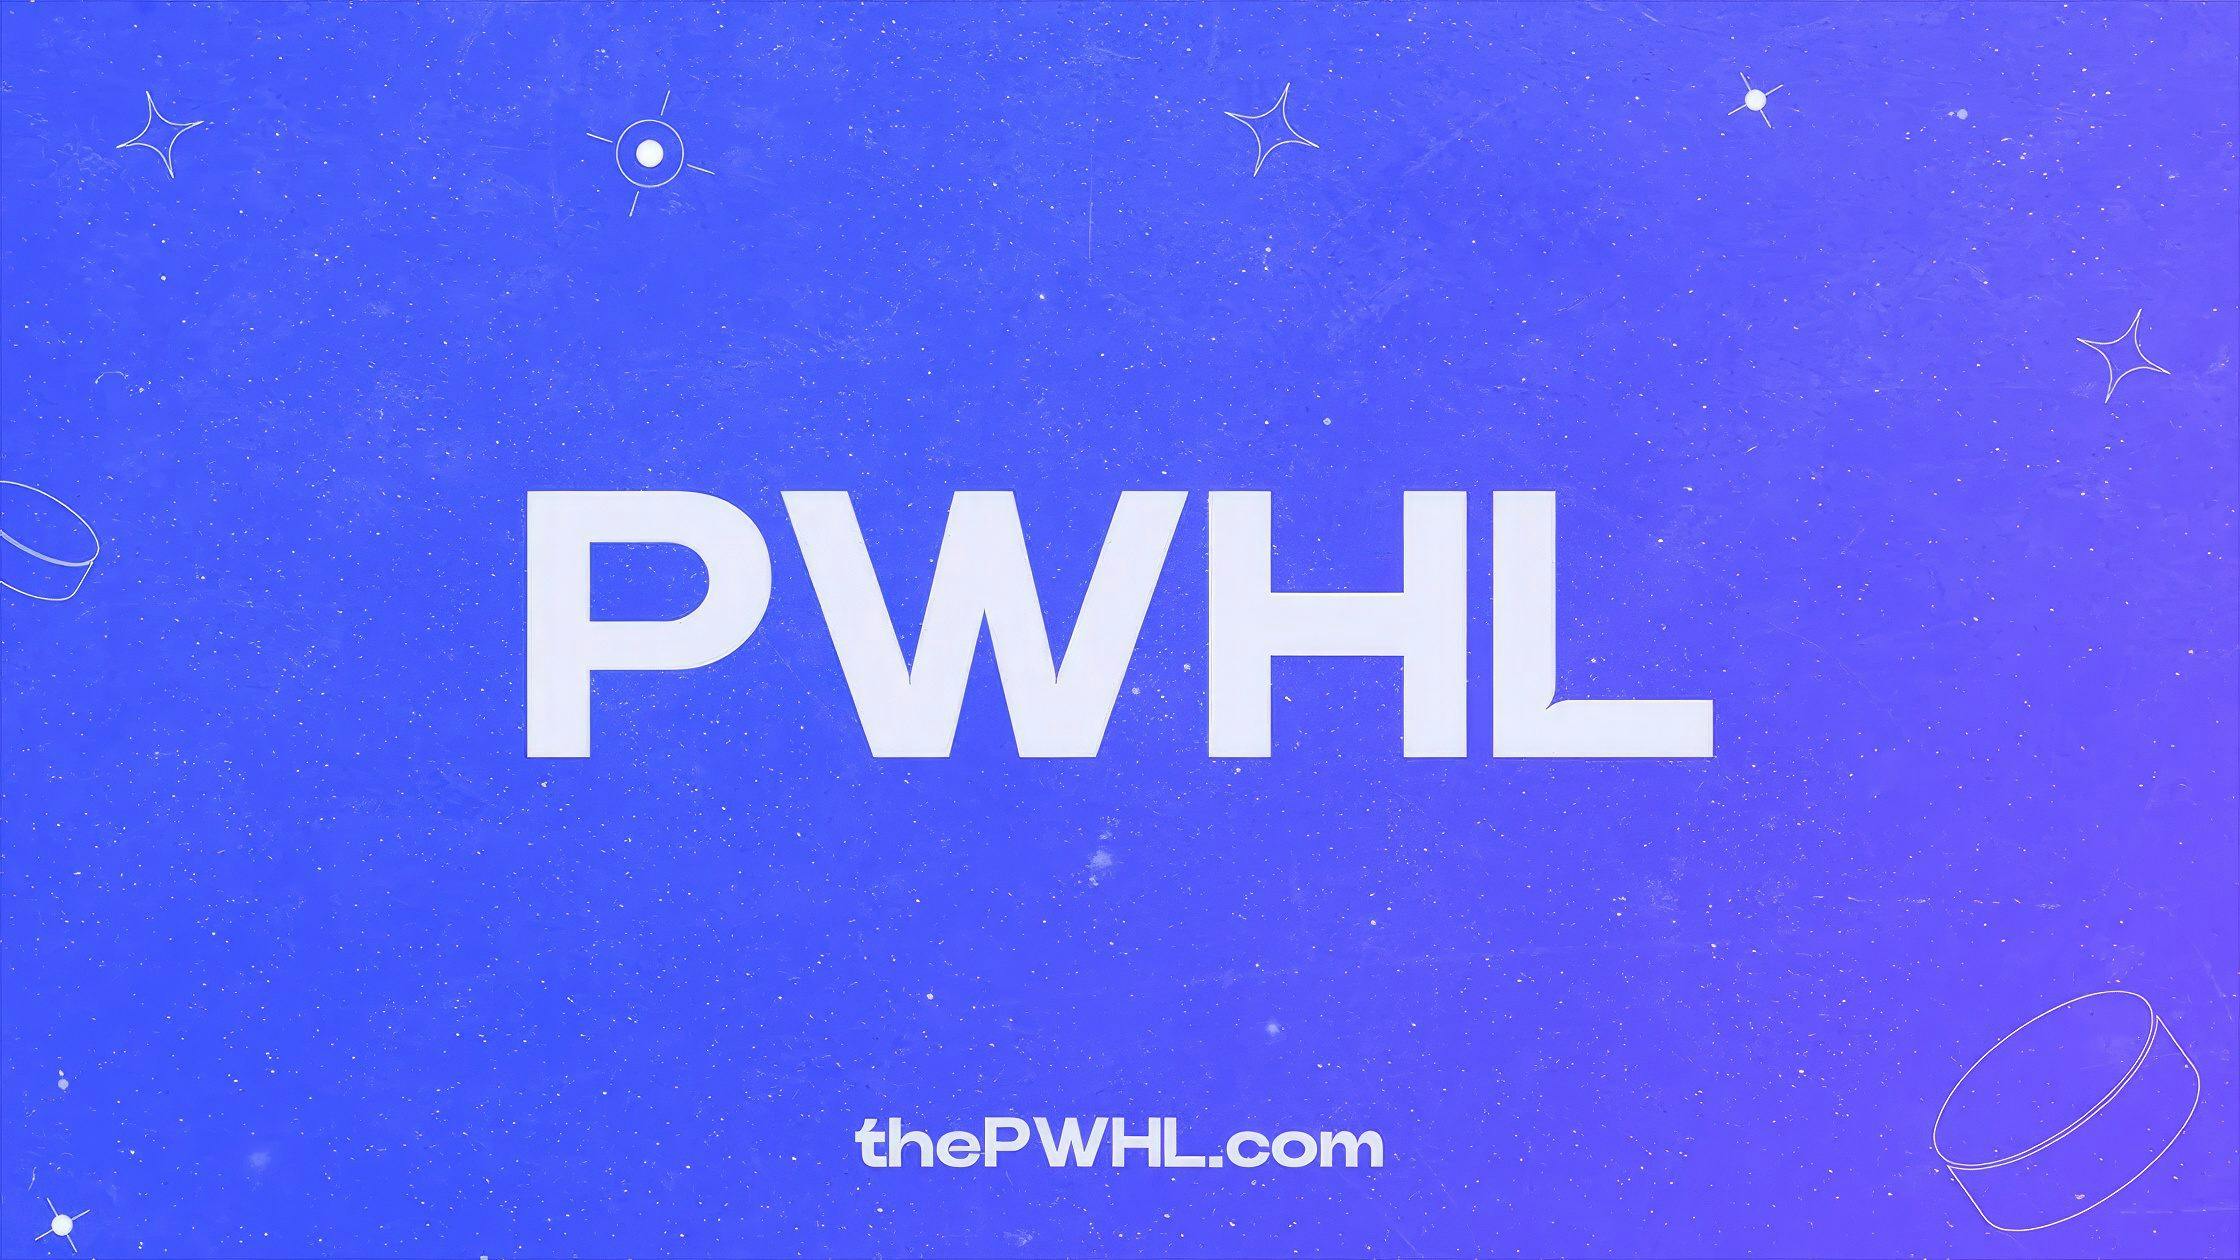 PWHL adds Canadian Tire Corporation as founding partner